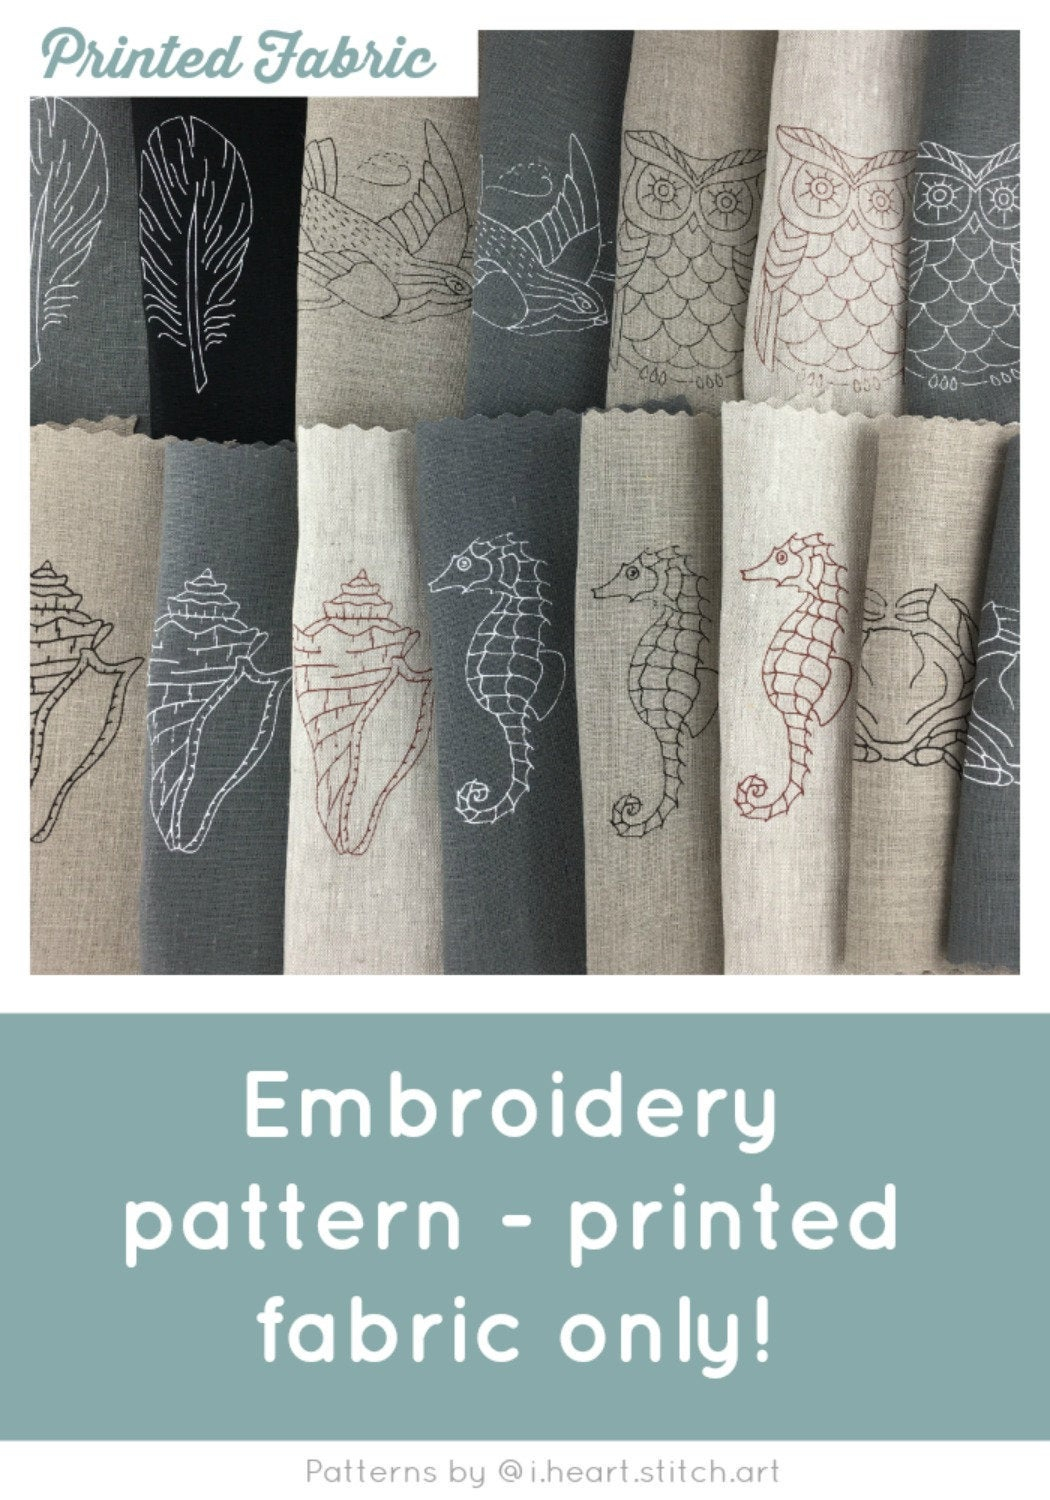 Free Hand Embroidery Patterns To Print Printed Embroidery Pattern Hand Embroidery Pattern On Fabric